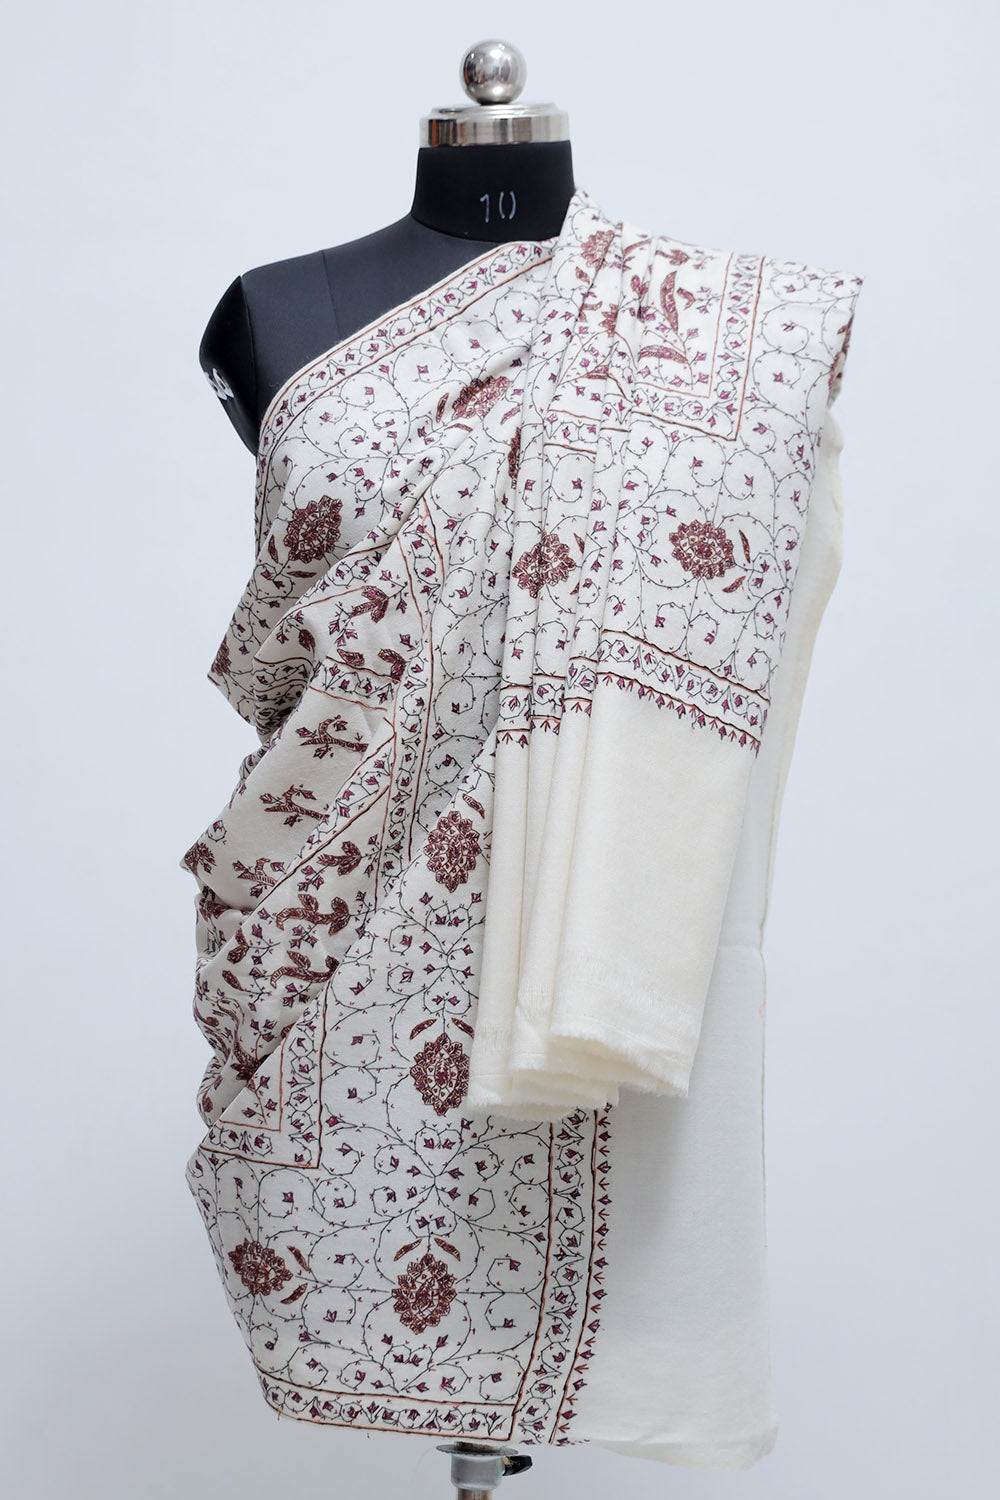 Off White Colour Base With Attractive Sozni Embroidery On